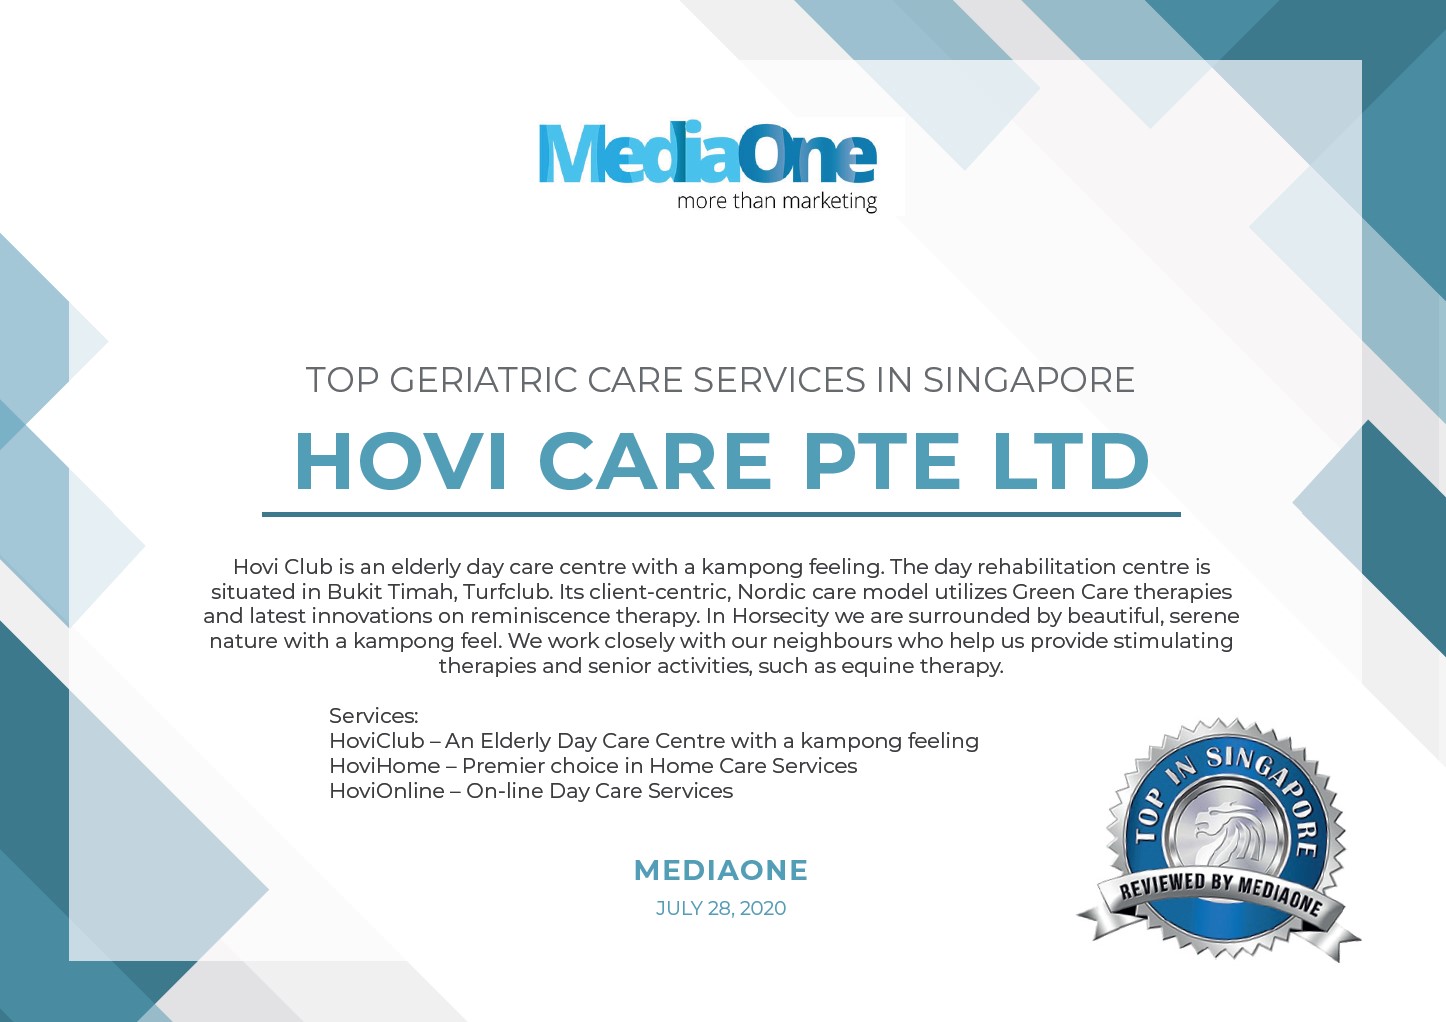 TOP Geriatric Care Services In Singapore 2020 by MediaOne